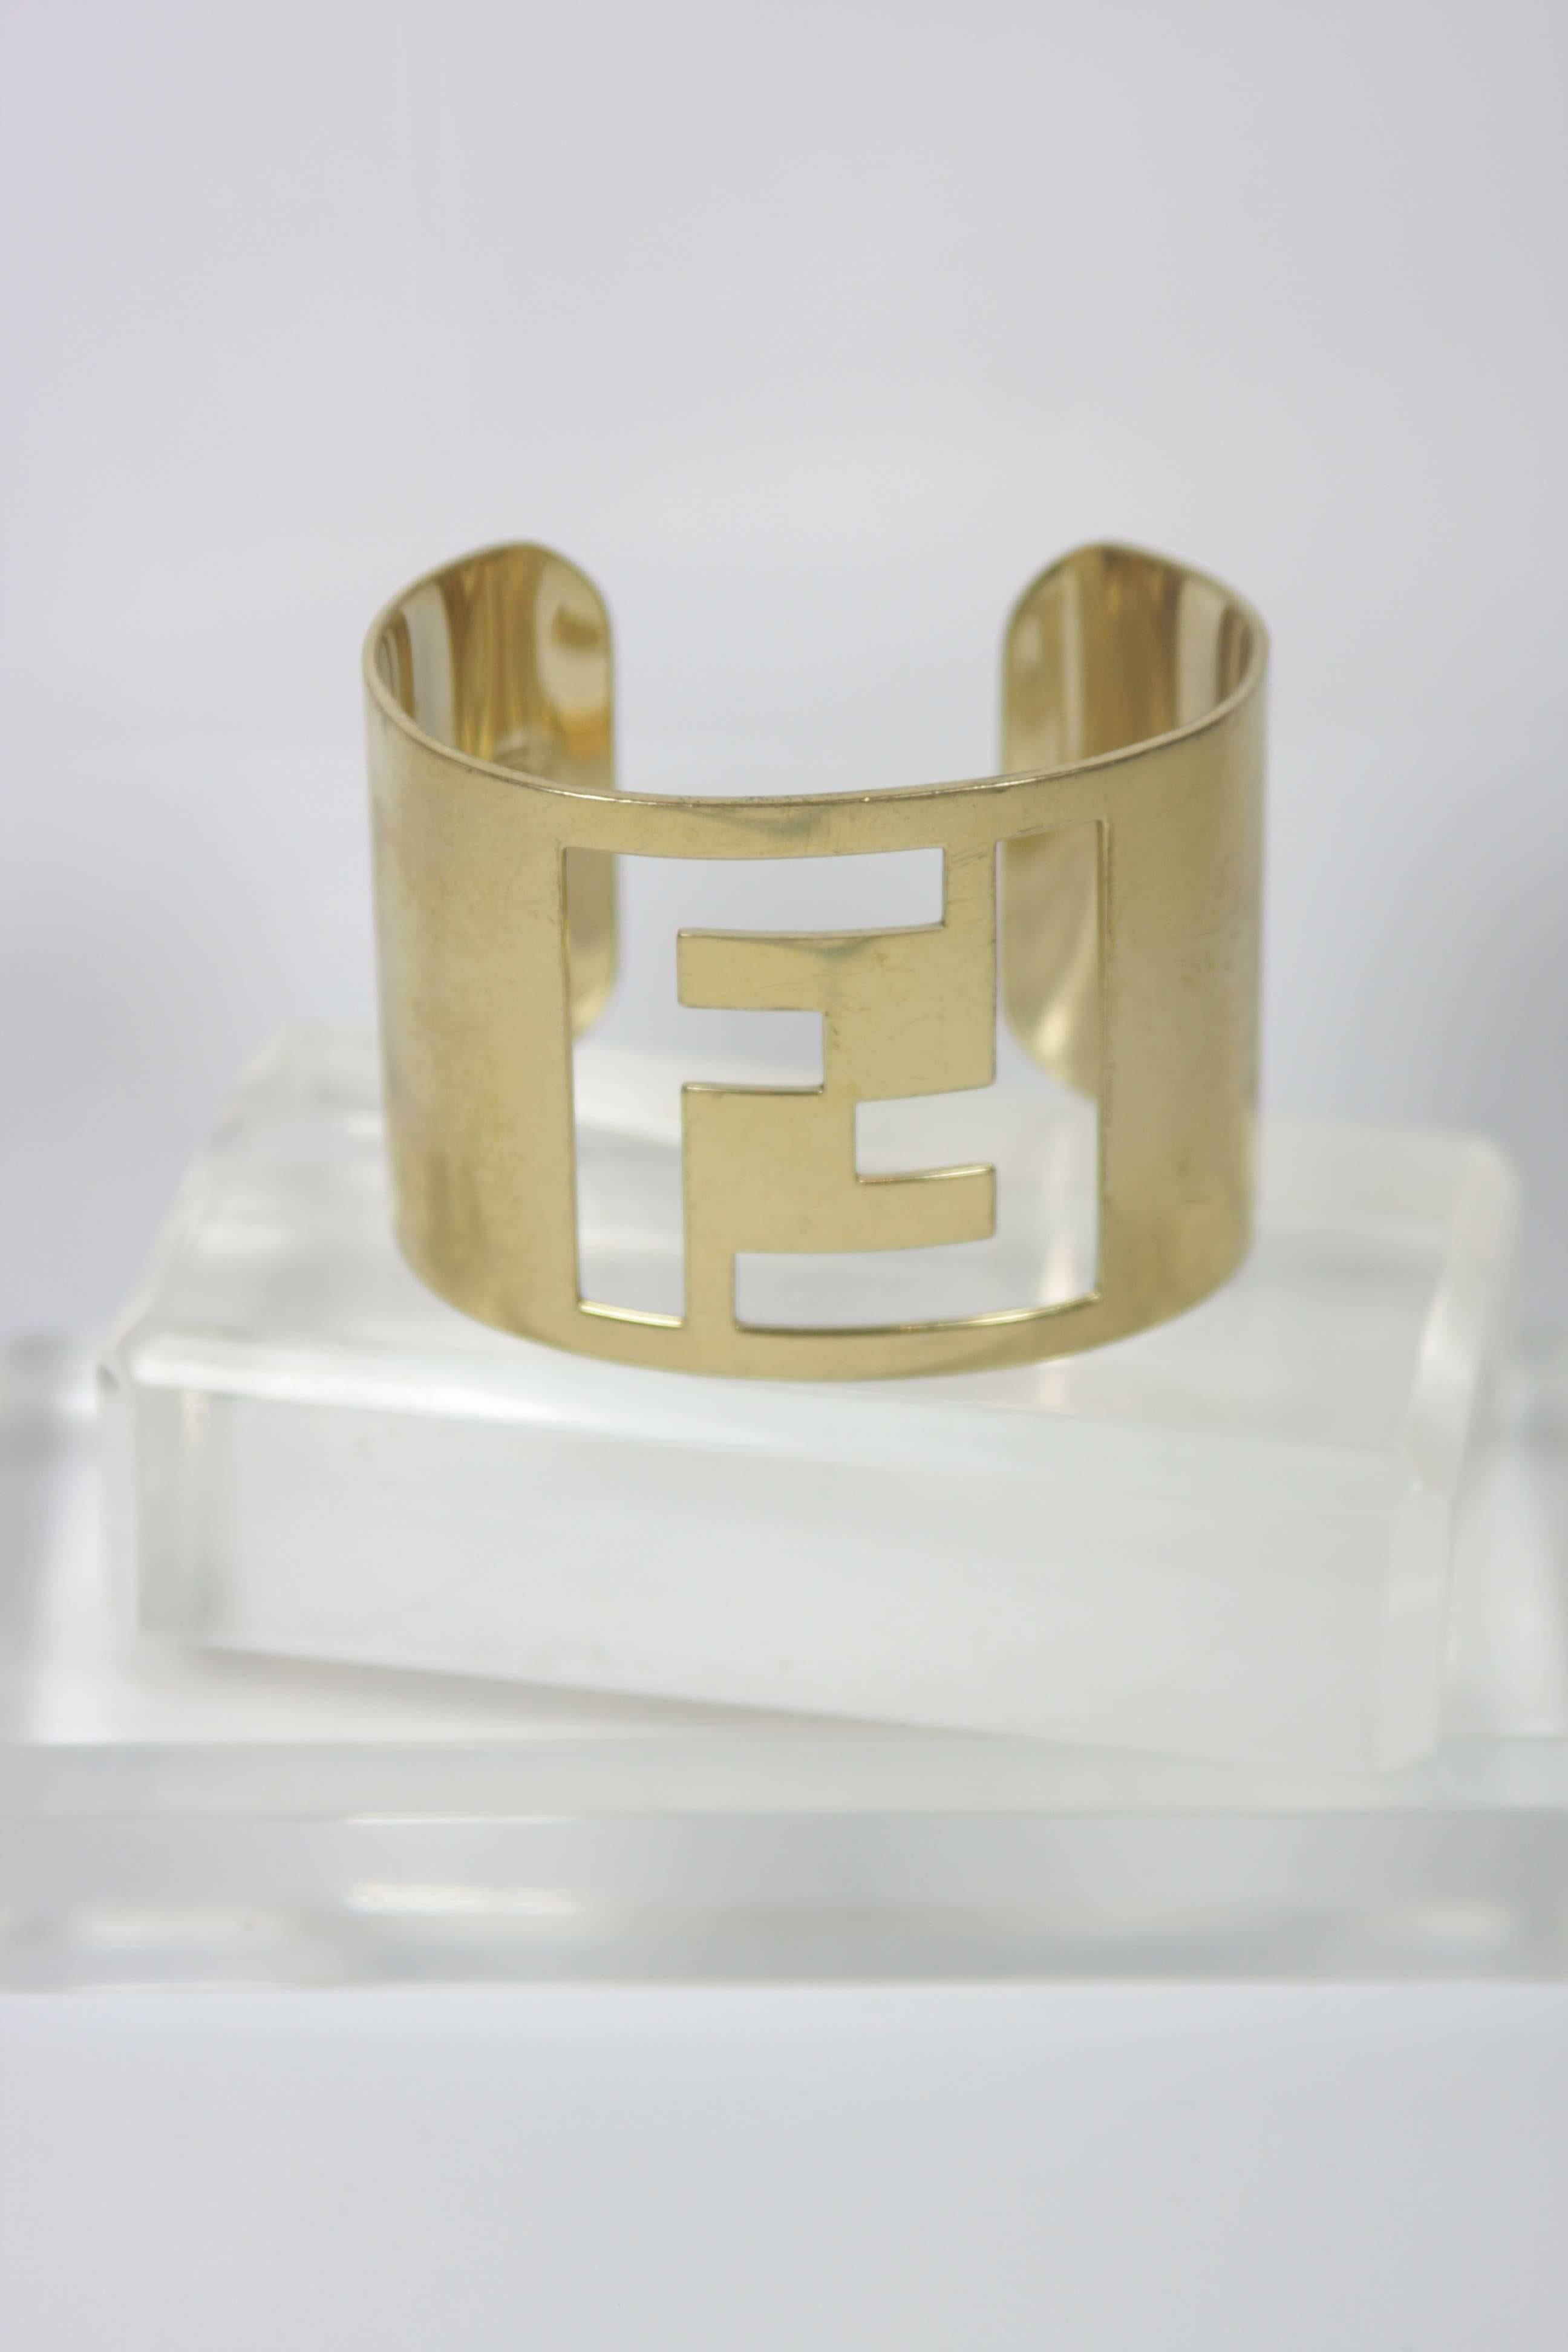  This Fendi design is available for viewing at our Beverly Hills Boutique. We offer a large selection of evening gowns and luxury garments. 

 This cuff style bracelet is composed of a gold tone metal and features the classic Fendi logo. In good